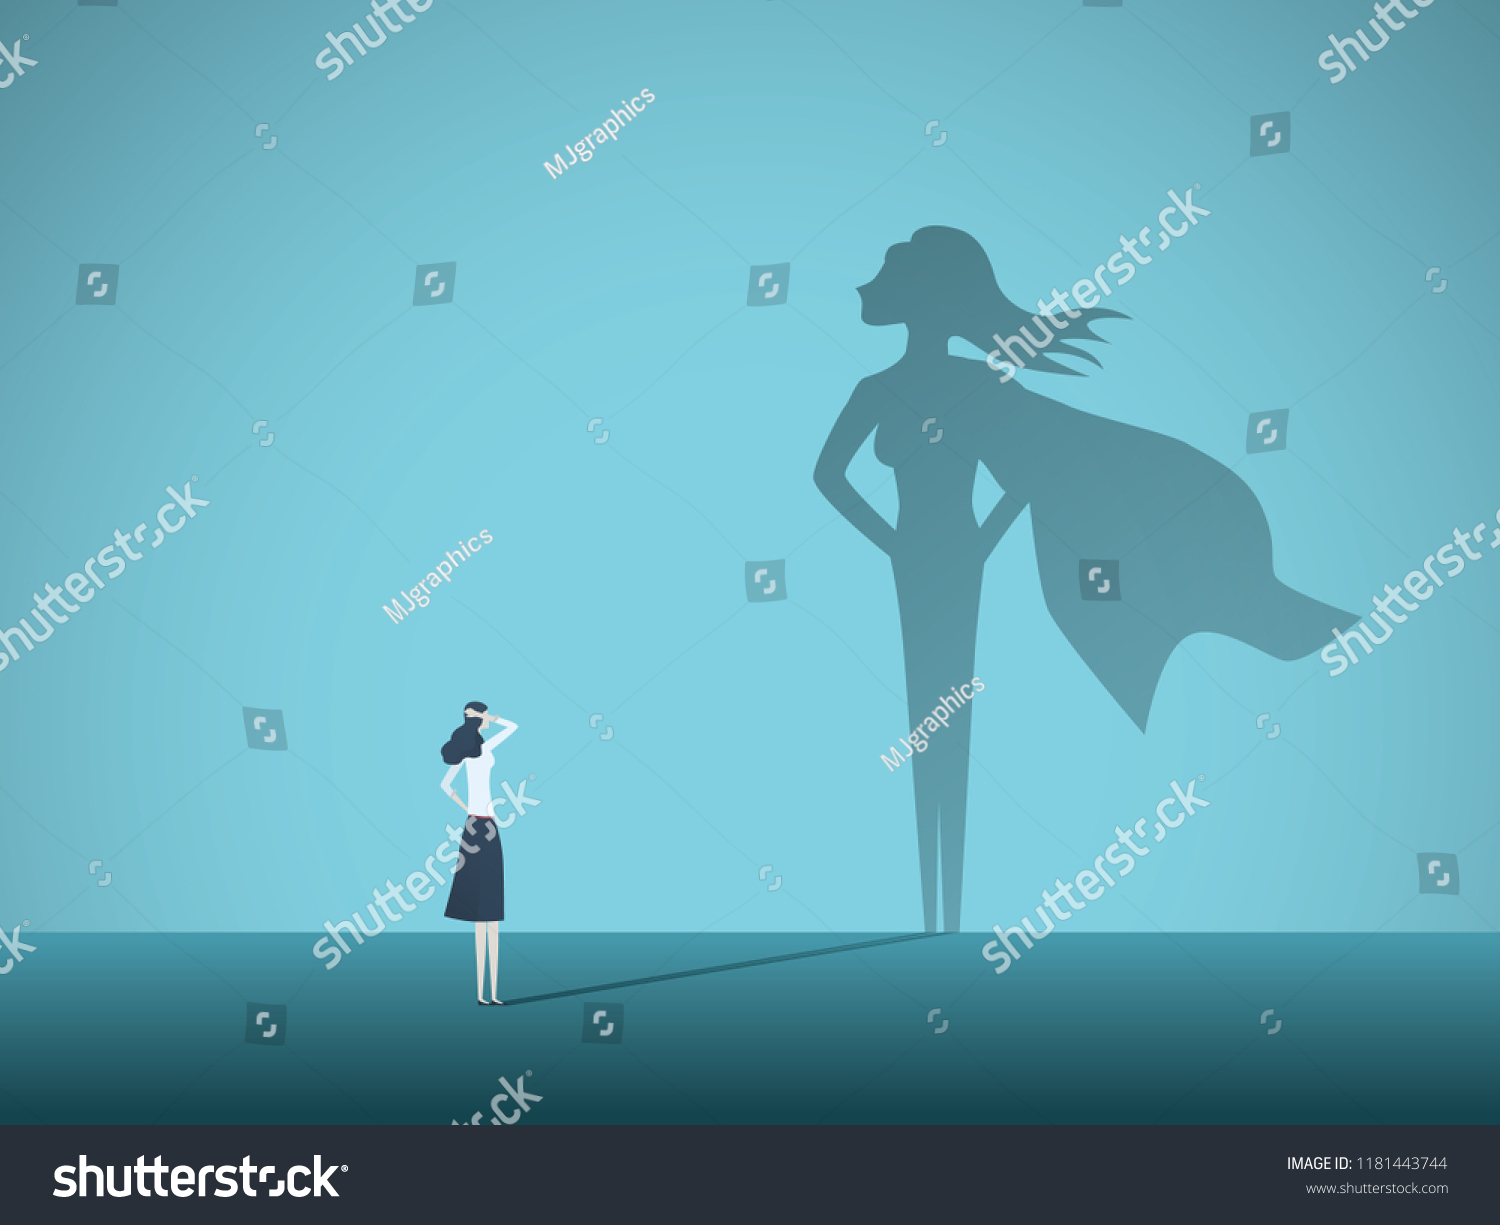 Businesswoman with superhero shadow vector concept. Business symbol of emancipation, ambition, success, motivation, leadership, courage and challenge. Eps10 vector illustration #1181443744